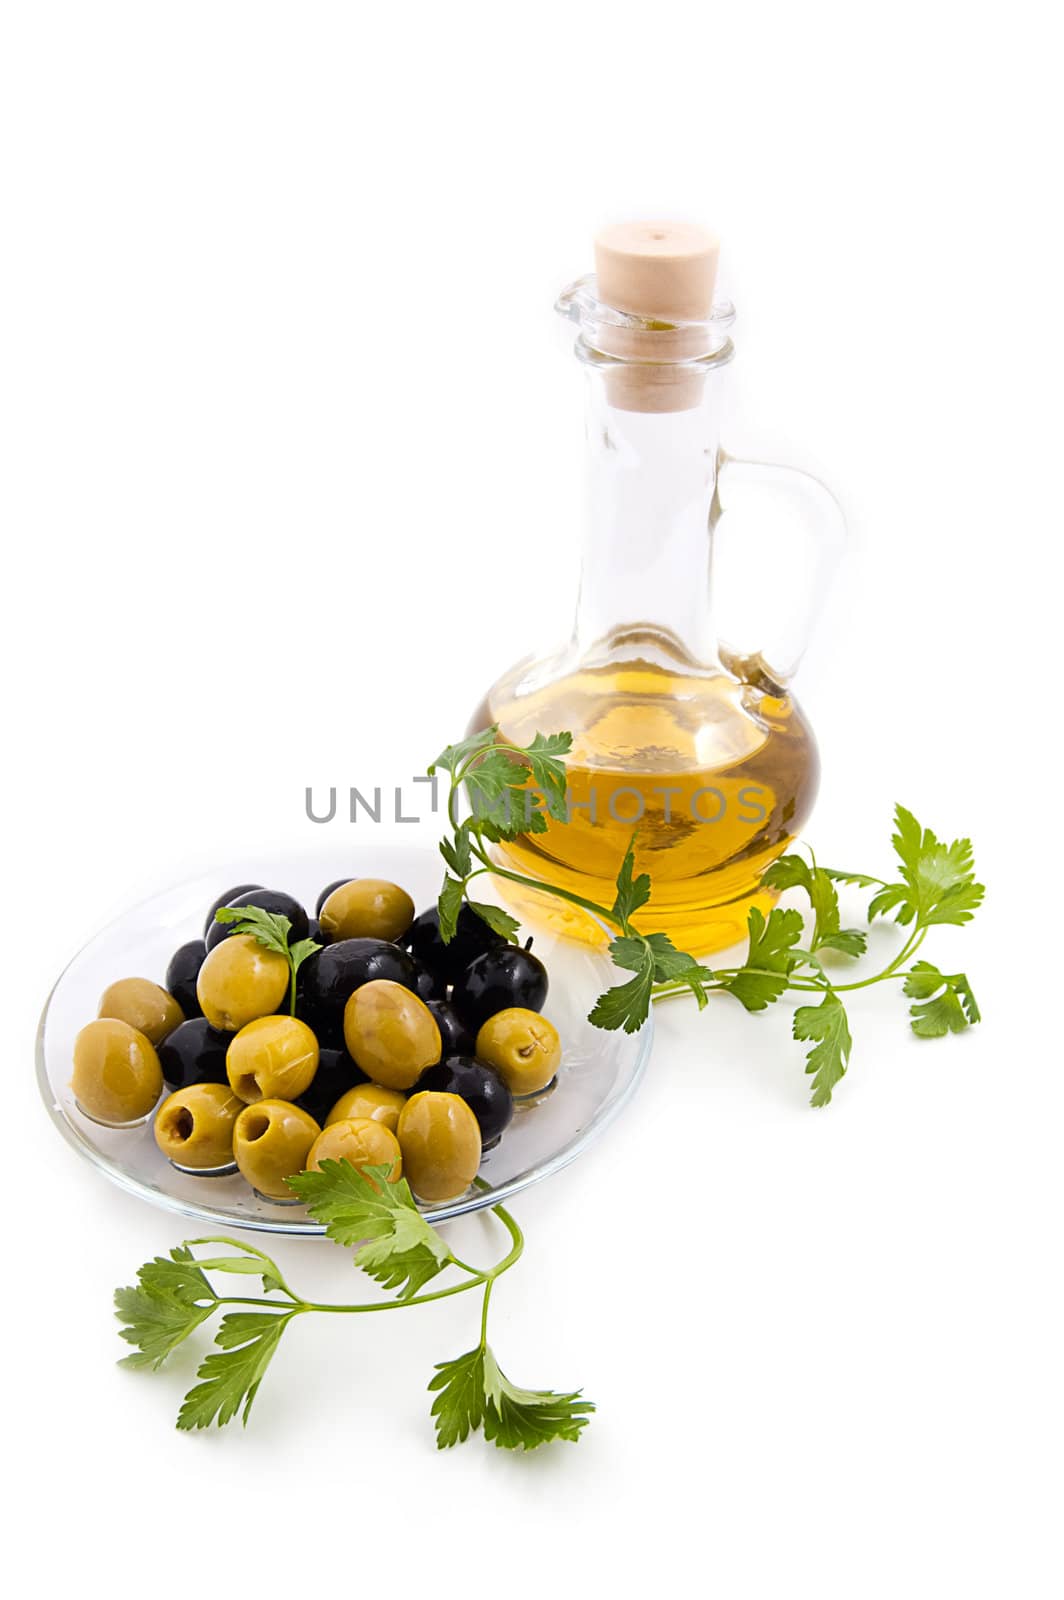 Olives and oil jug with greens on white, focus on olives